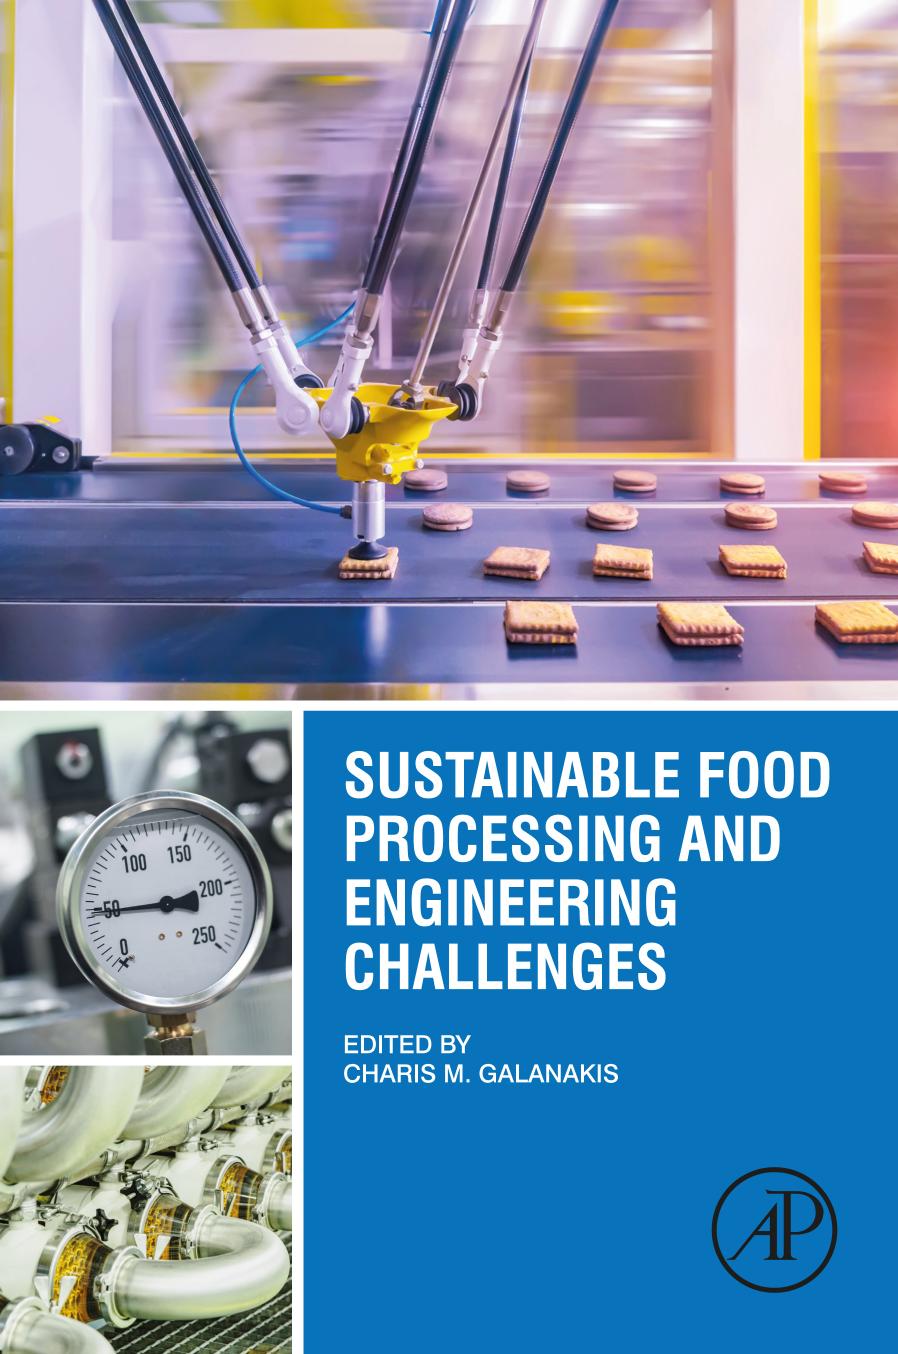 Sustainable food processing and engineering challenges: Sustainable food processing and engineering challenges